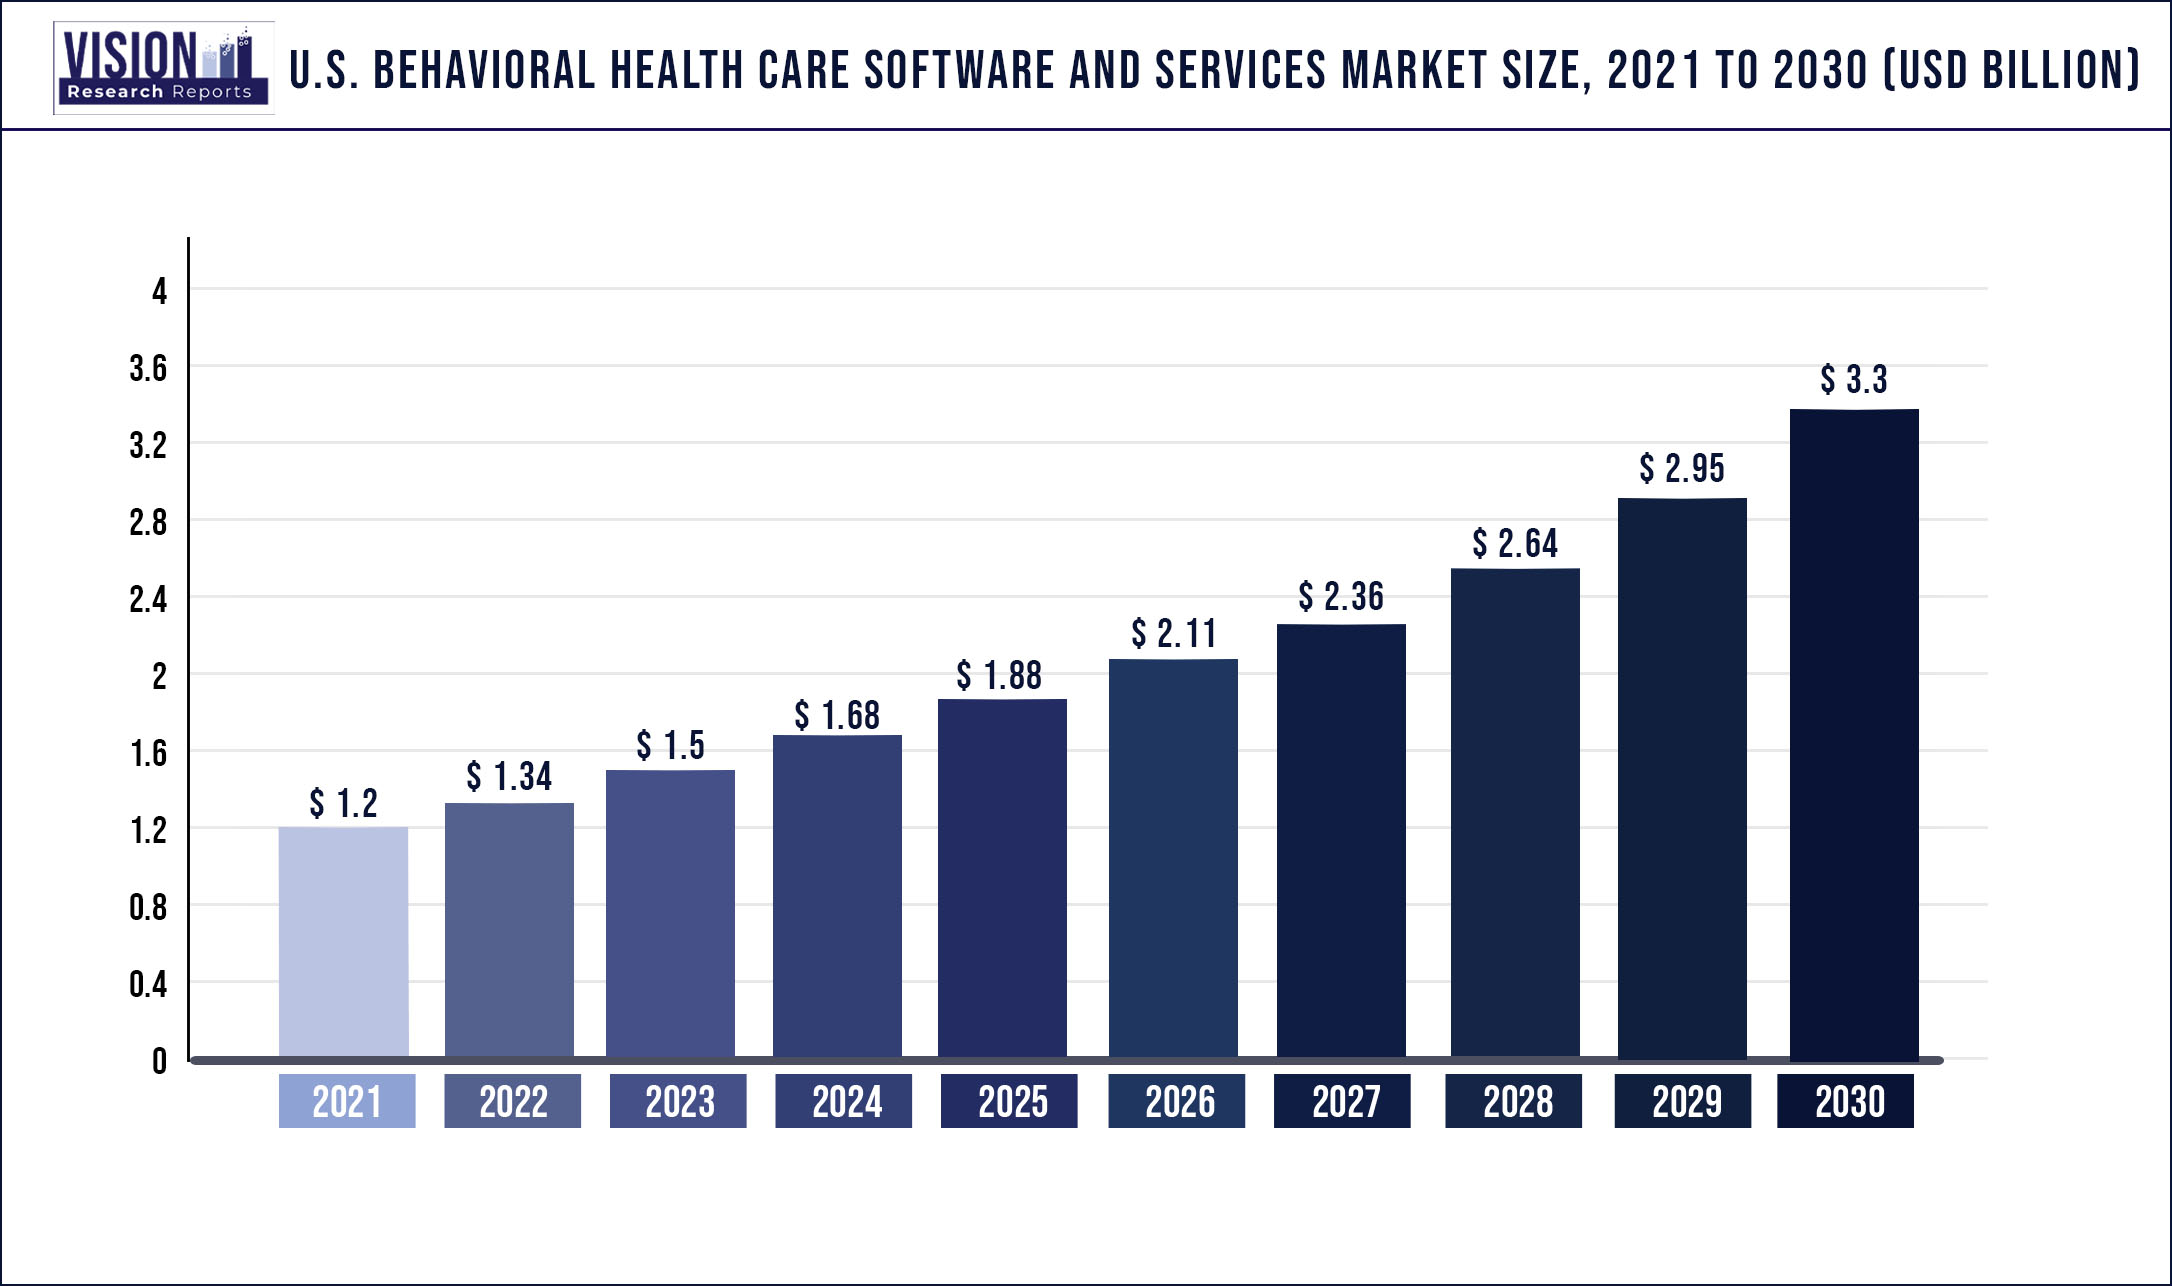 U.S. Behavioral Health Care Software And Services Market Size 2021 to 2030